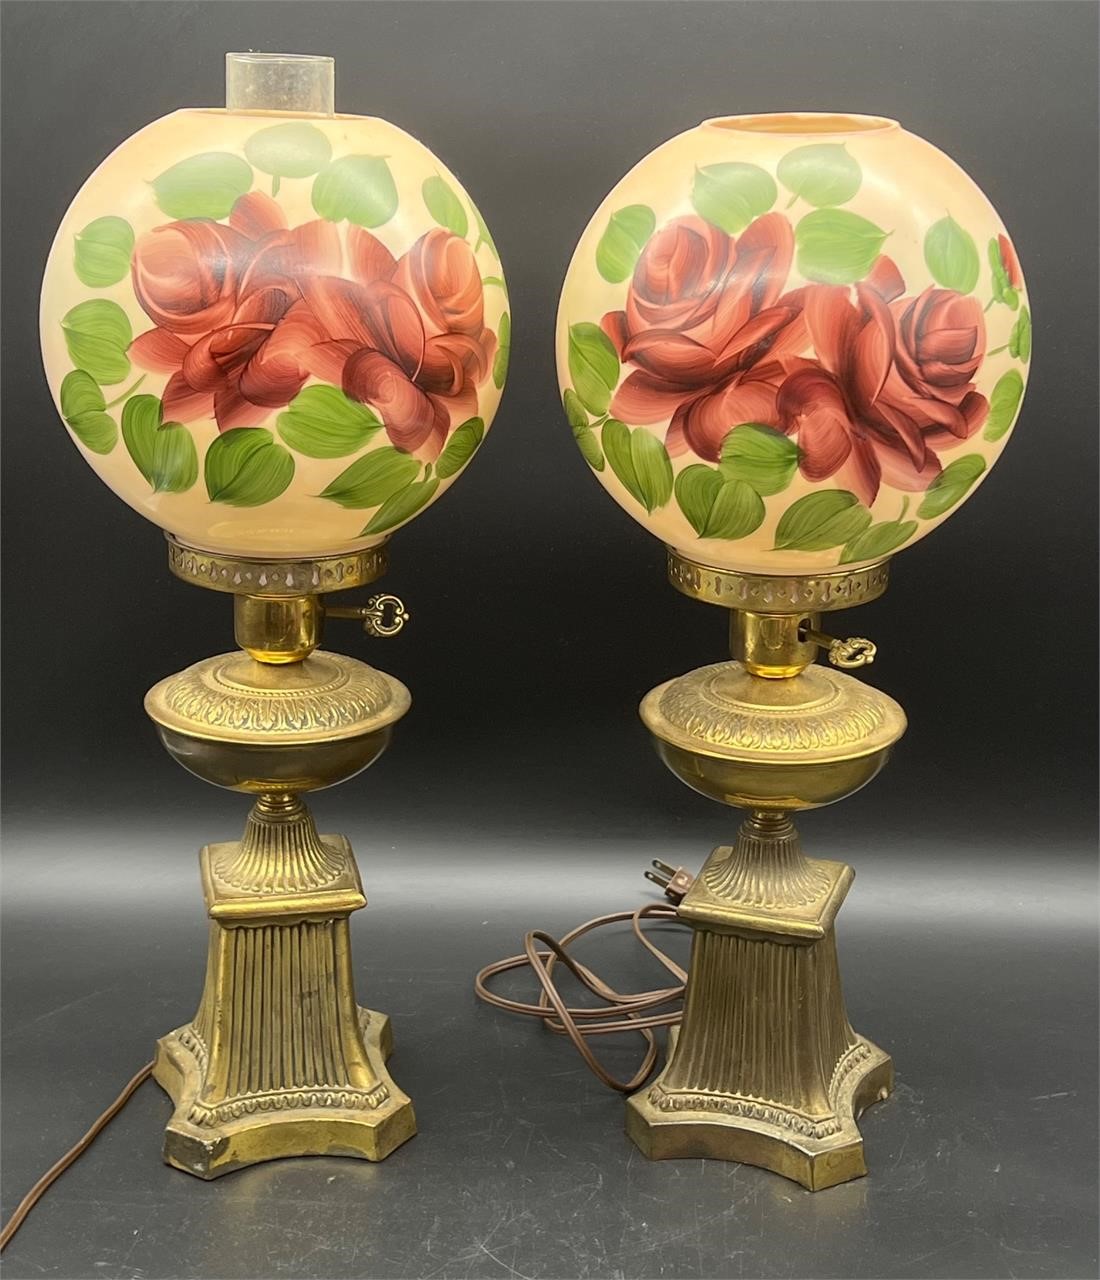 2 VTG HAND PAINTED GWTW SPELTER METAL LAMPS